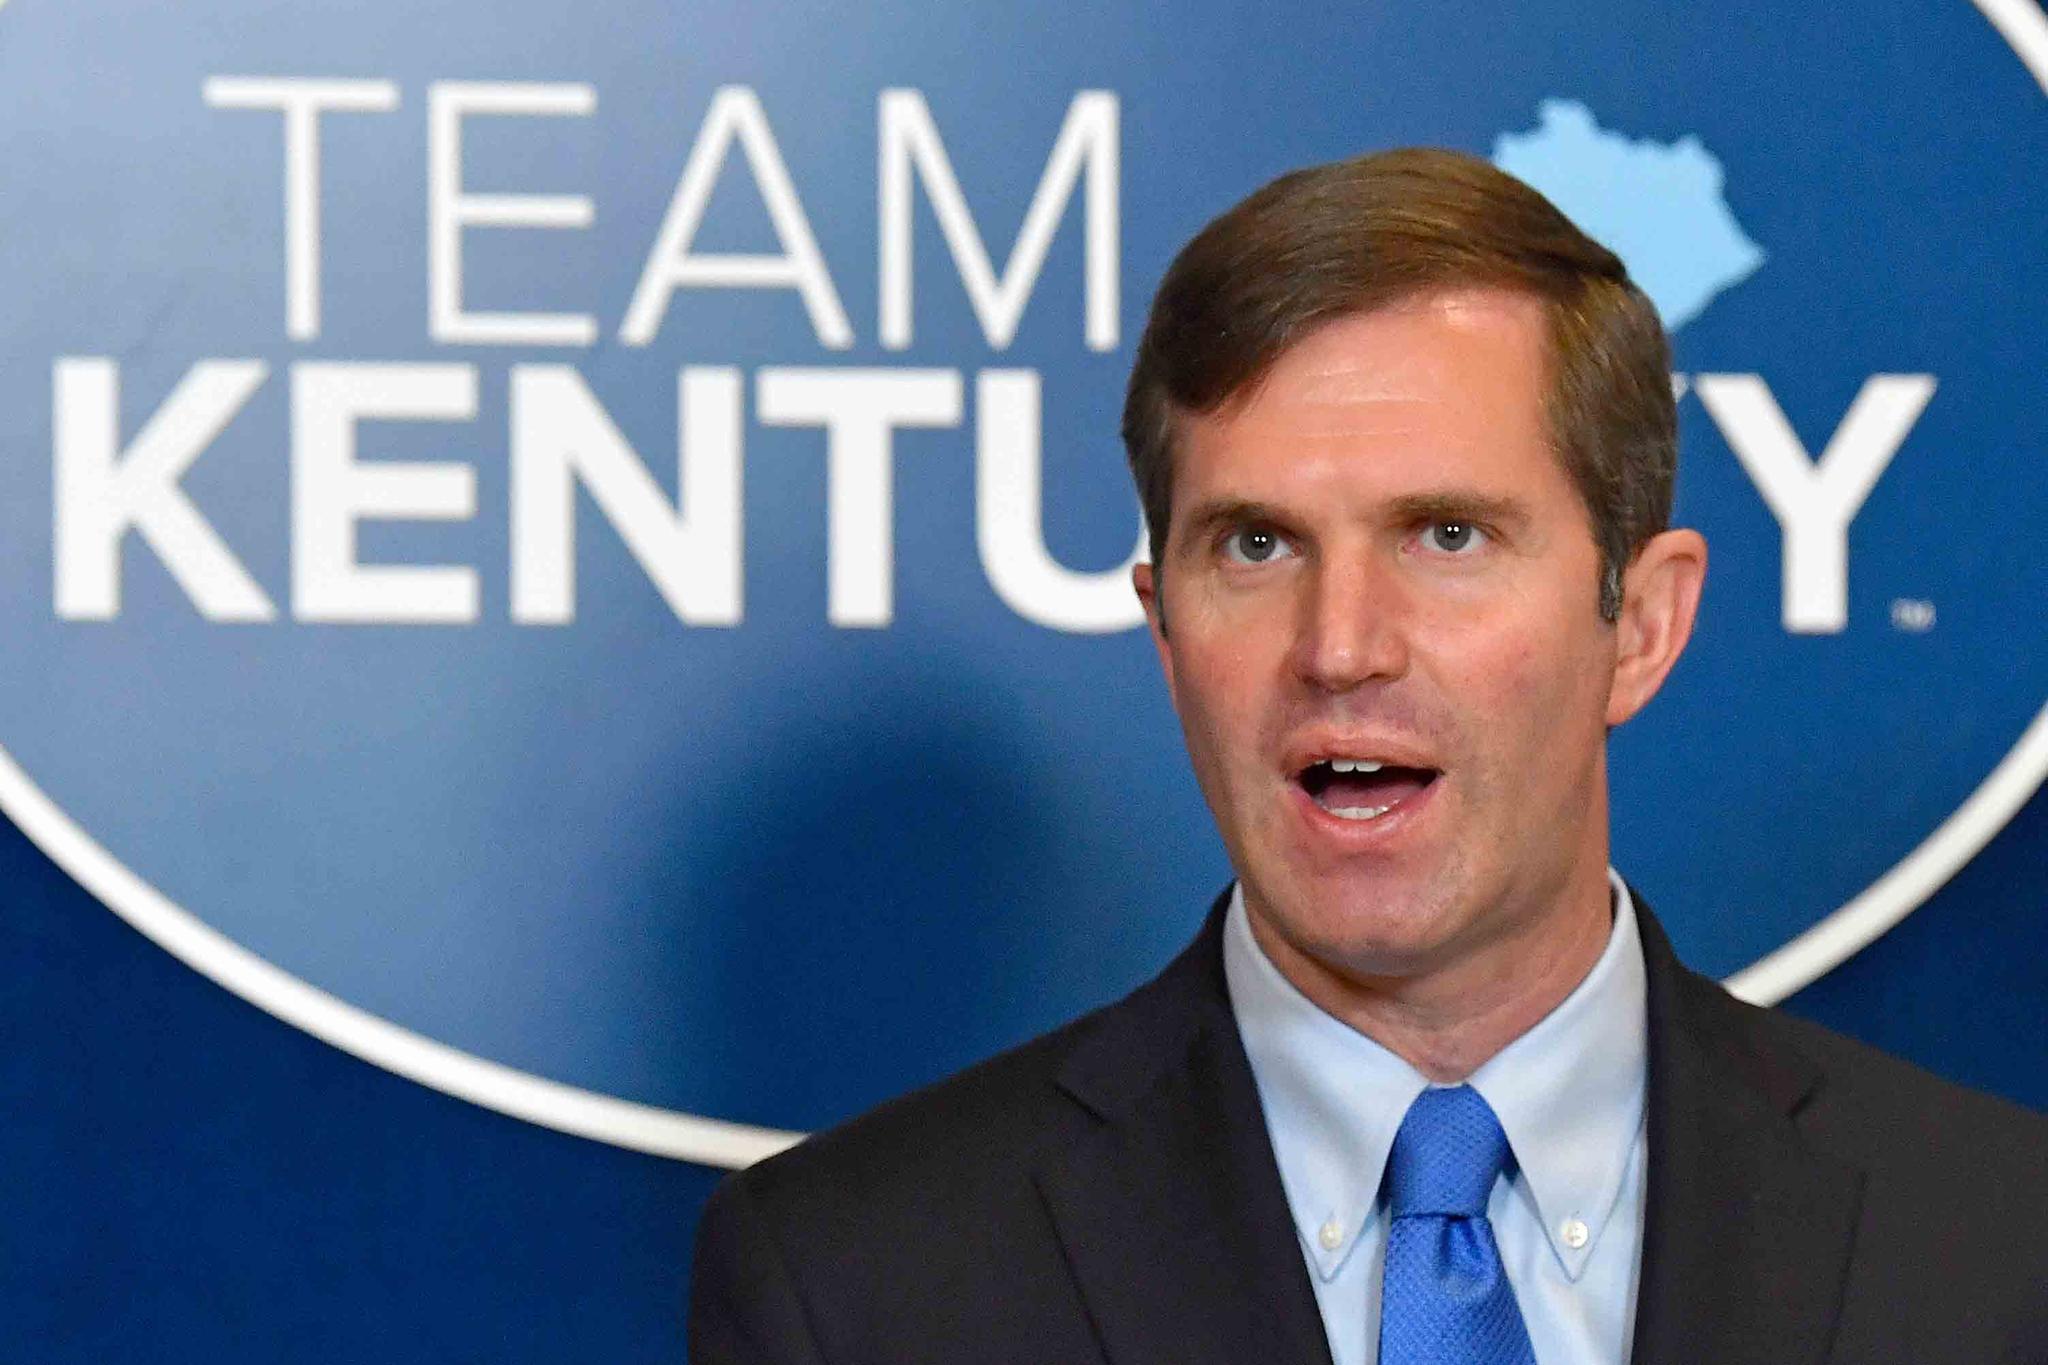 In this April 7, 2021, file photo, Kentucky Gov. Andy Beshear speaks to reporters at the Kentucky State Capitol in Frankfort, Ky.